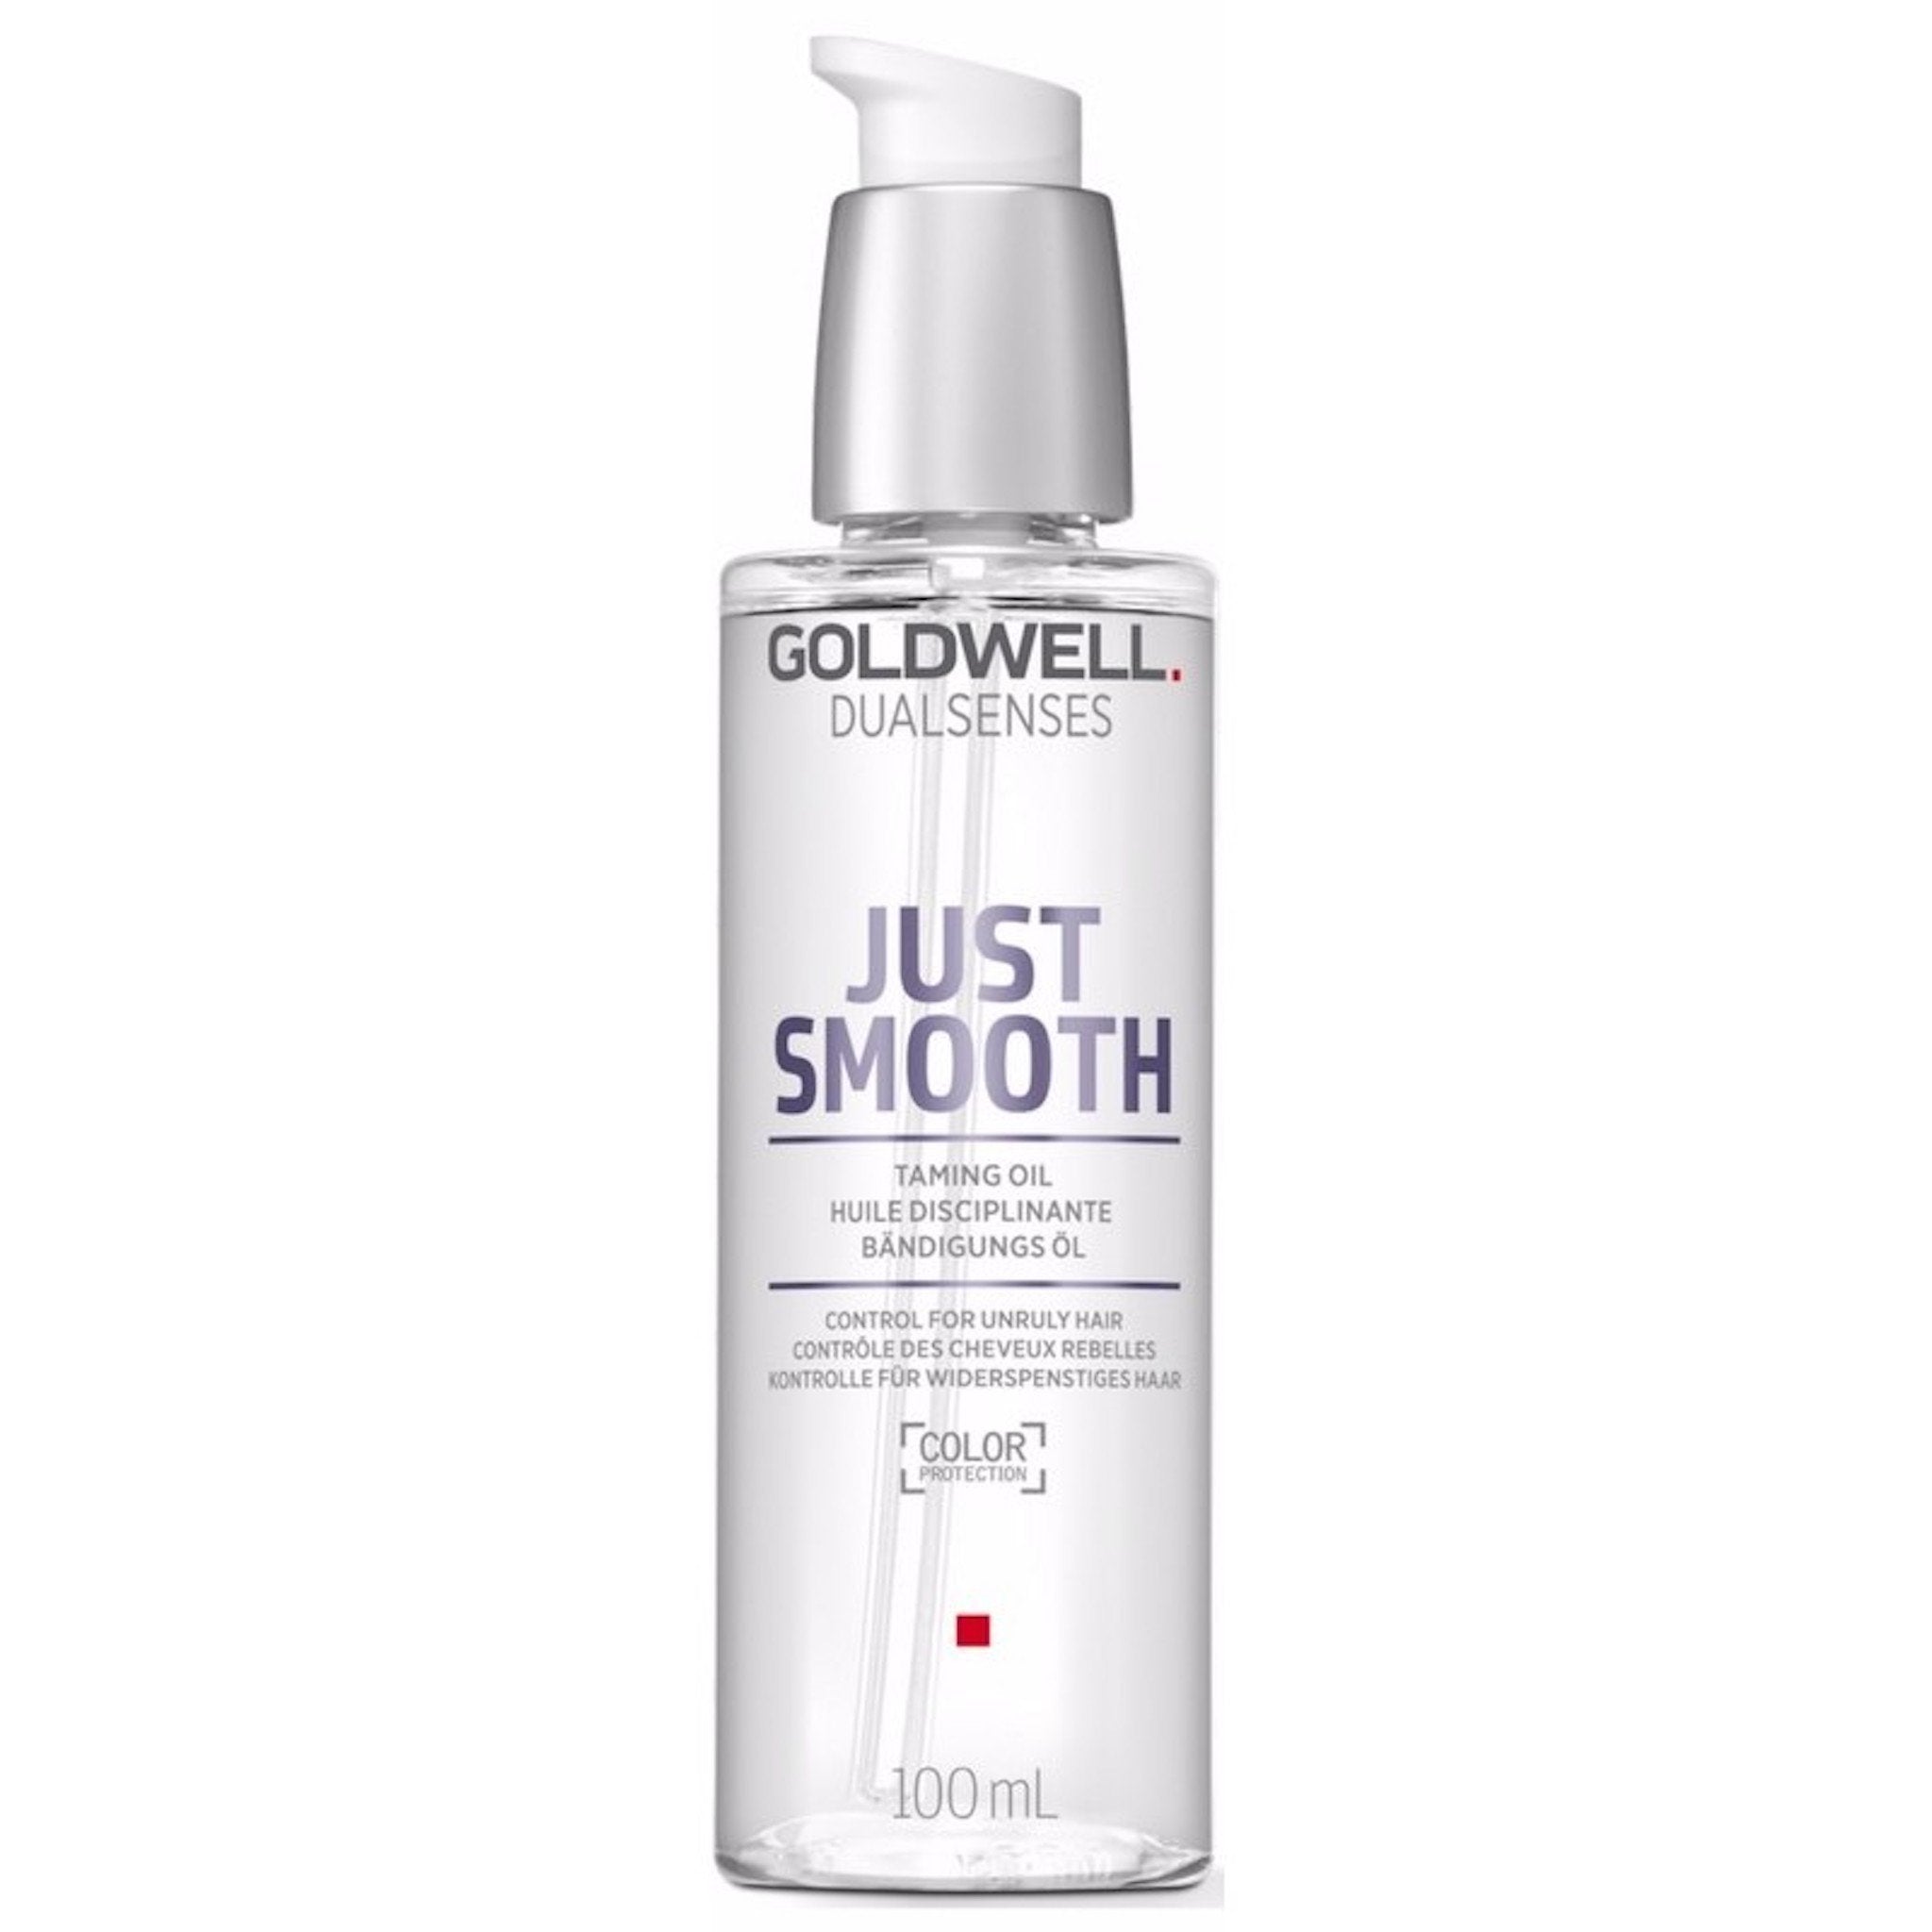 Goldwell. Just Smooth Huile Disciplinante - 100 ml - Concept C. Shop